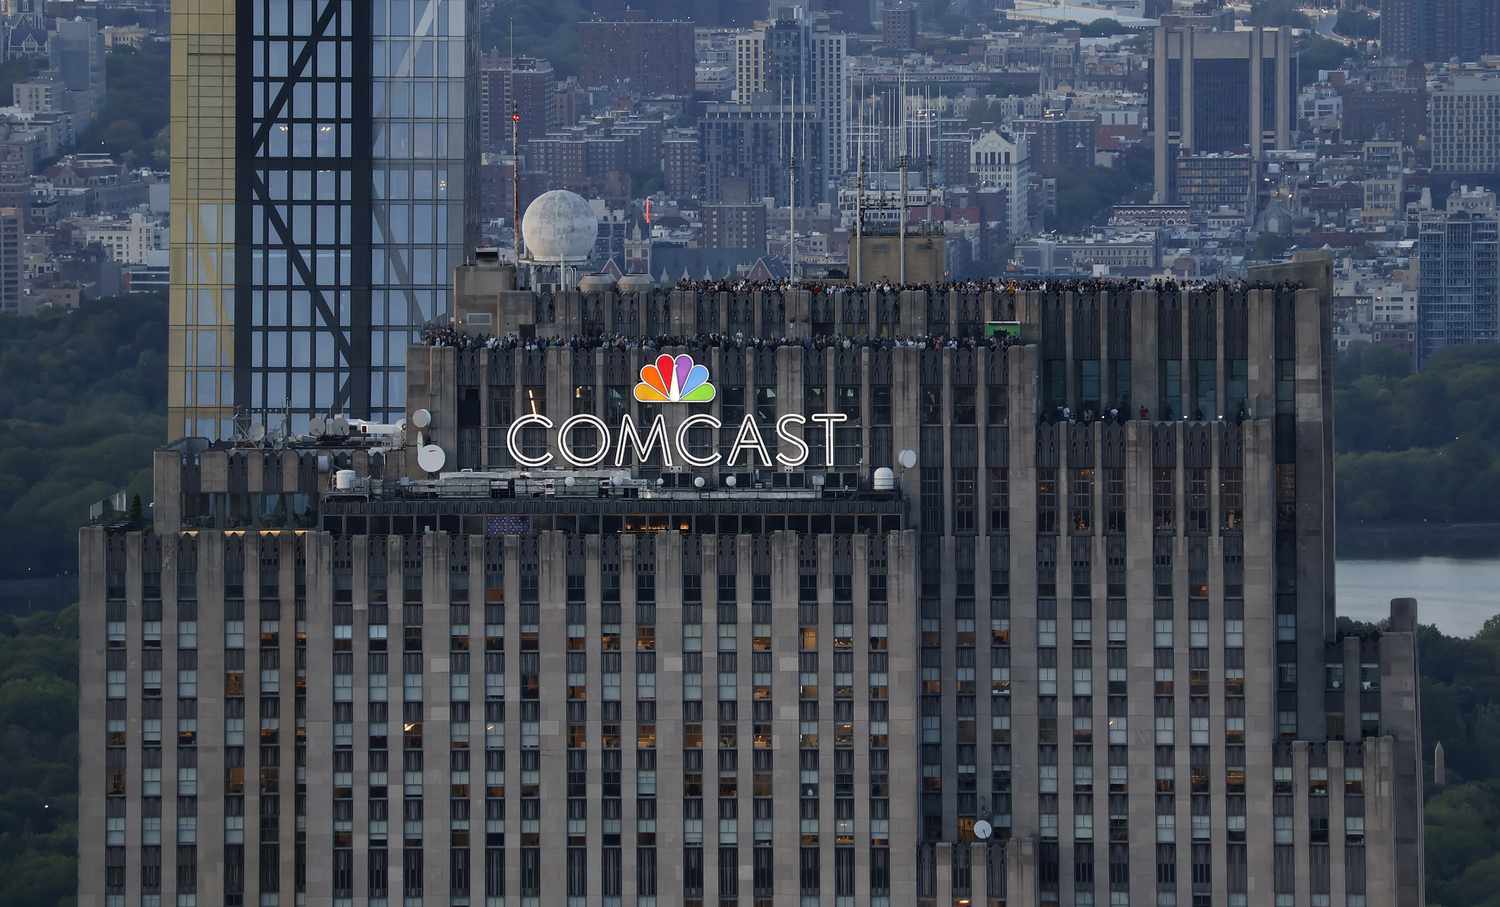 What You Need To Know Ahead of Comcast’s Earnings Report Thursday [Video]